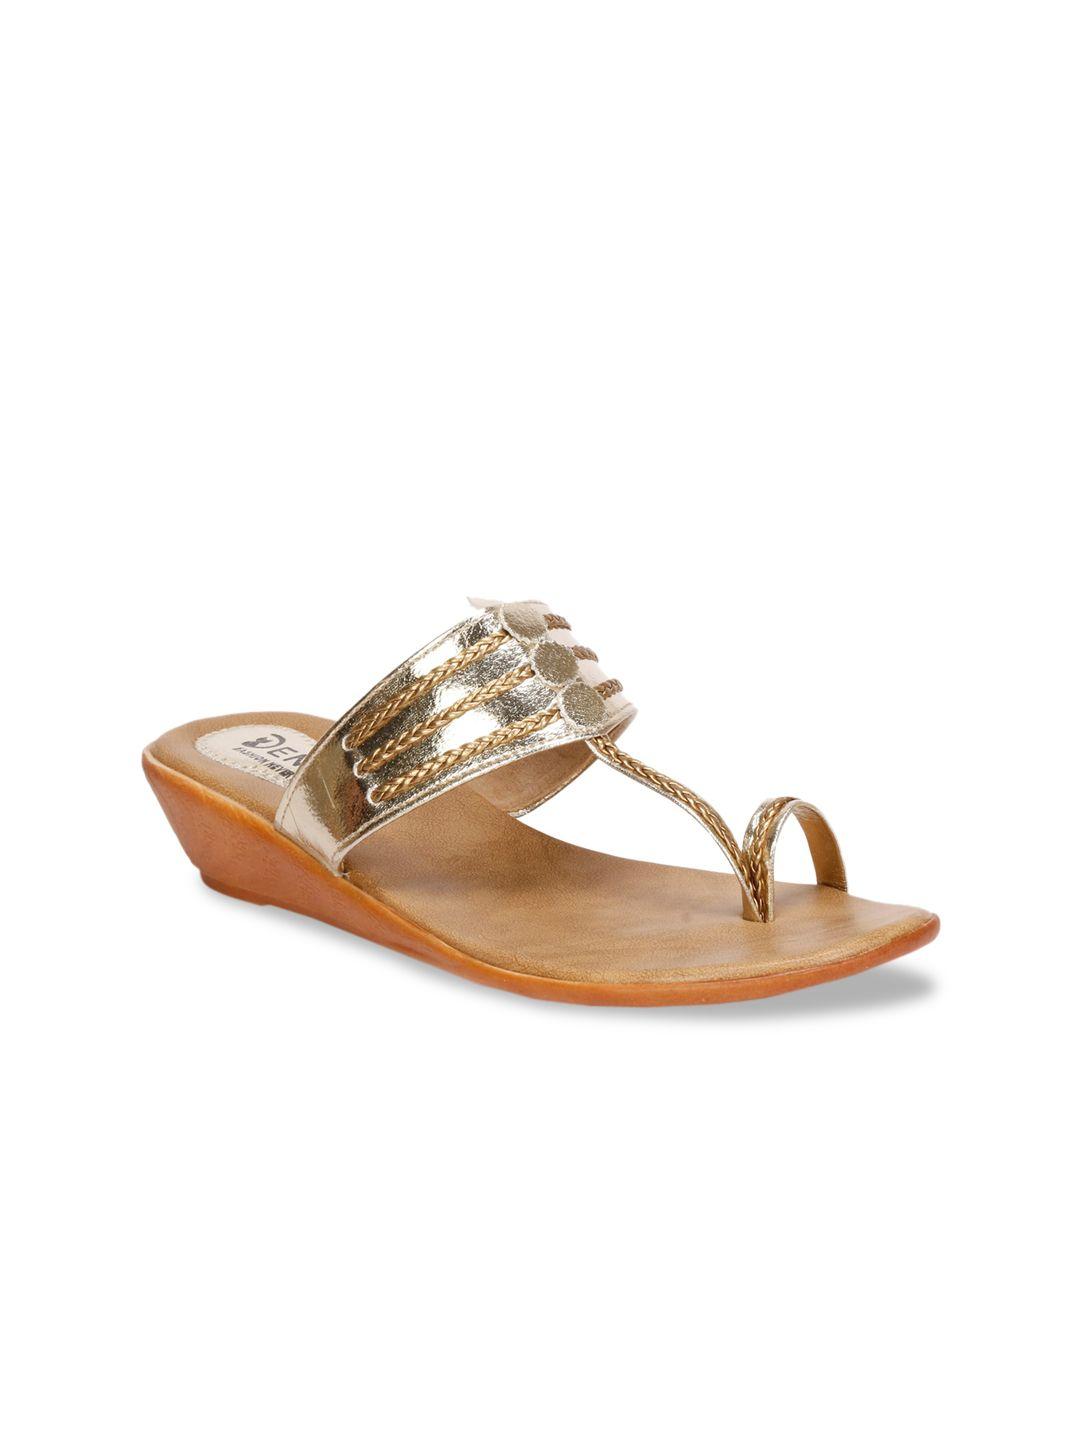 denill gold-toned wedge sandals